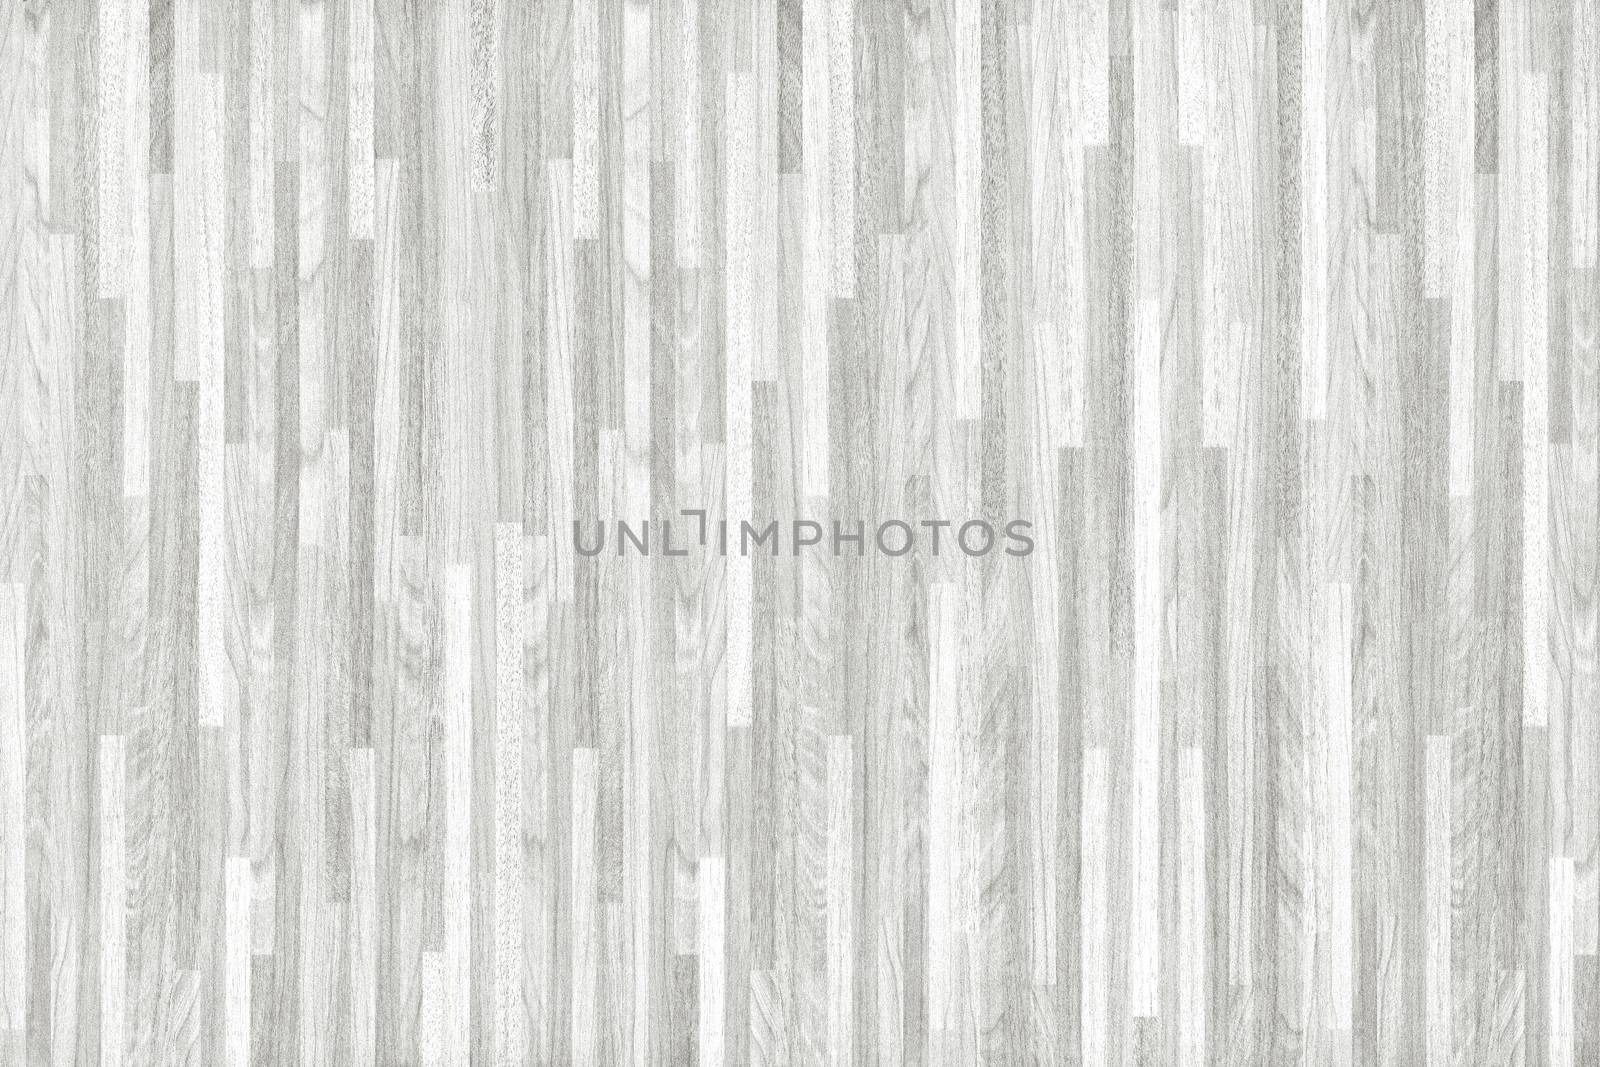 Wood texture with natural patterns, white washed wooden texture